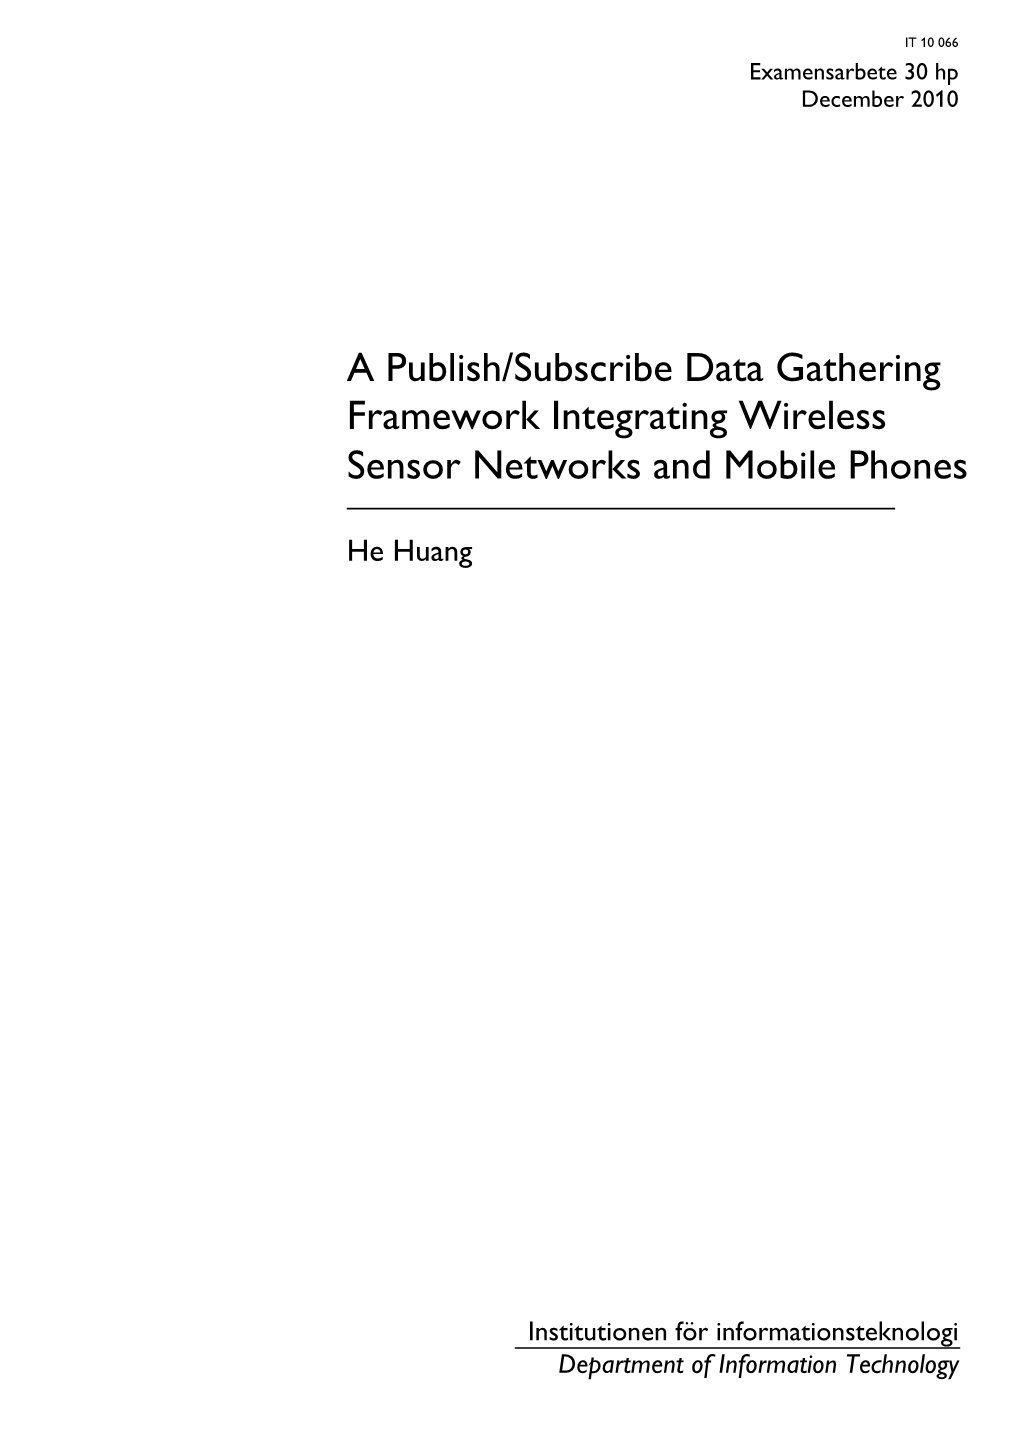 A Publish/Subscribe Data Gathering Framework Integrating Wireless Sensor Networks and Mobile Phones